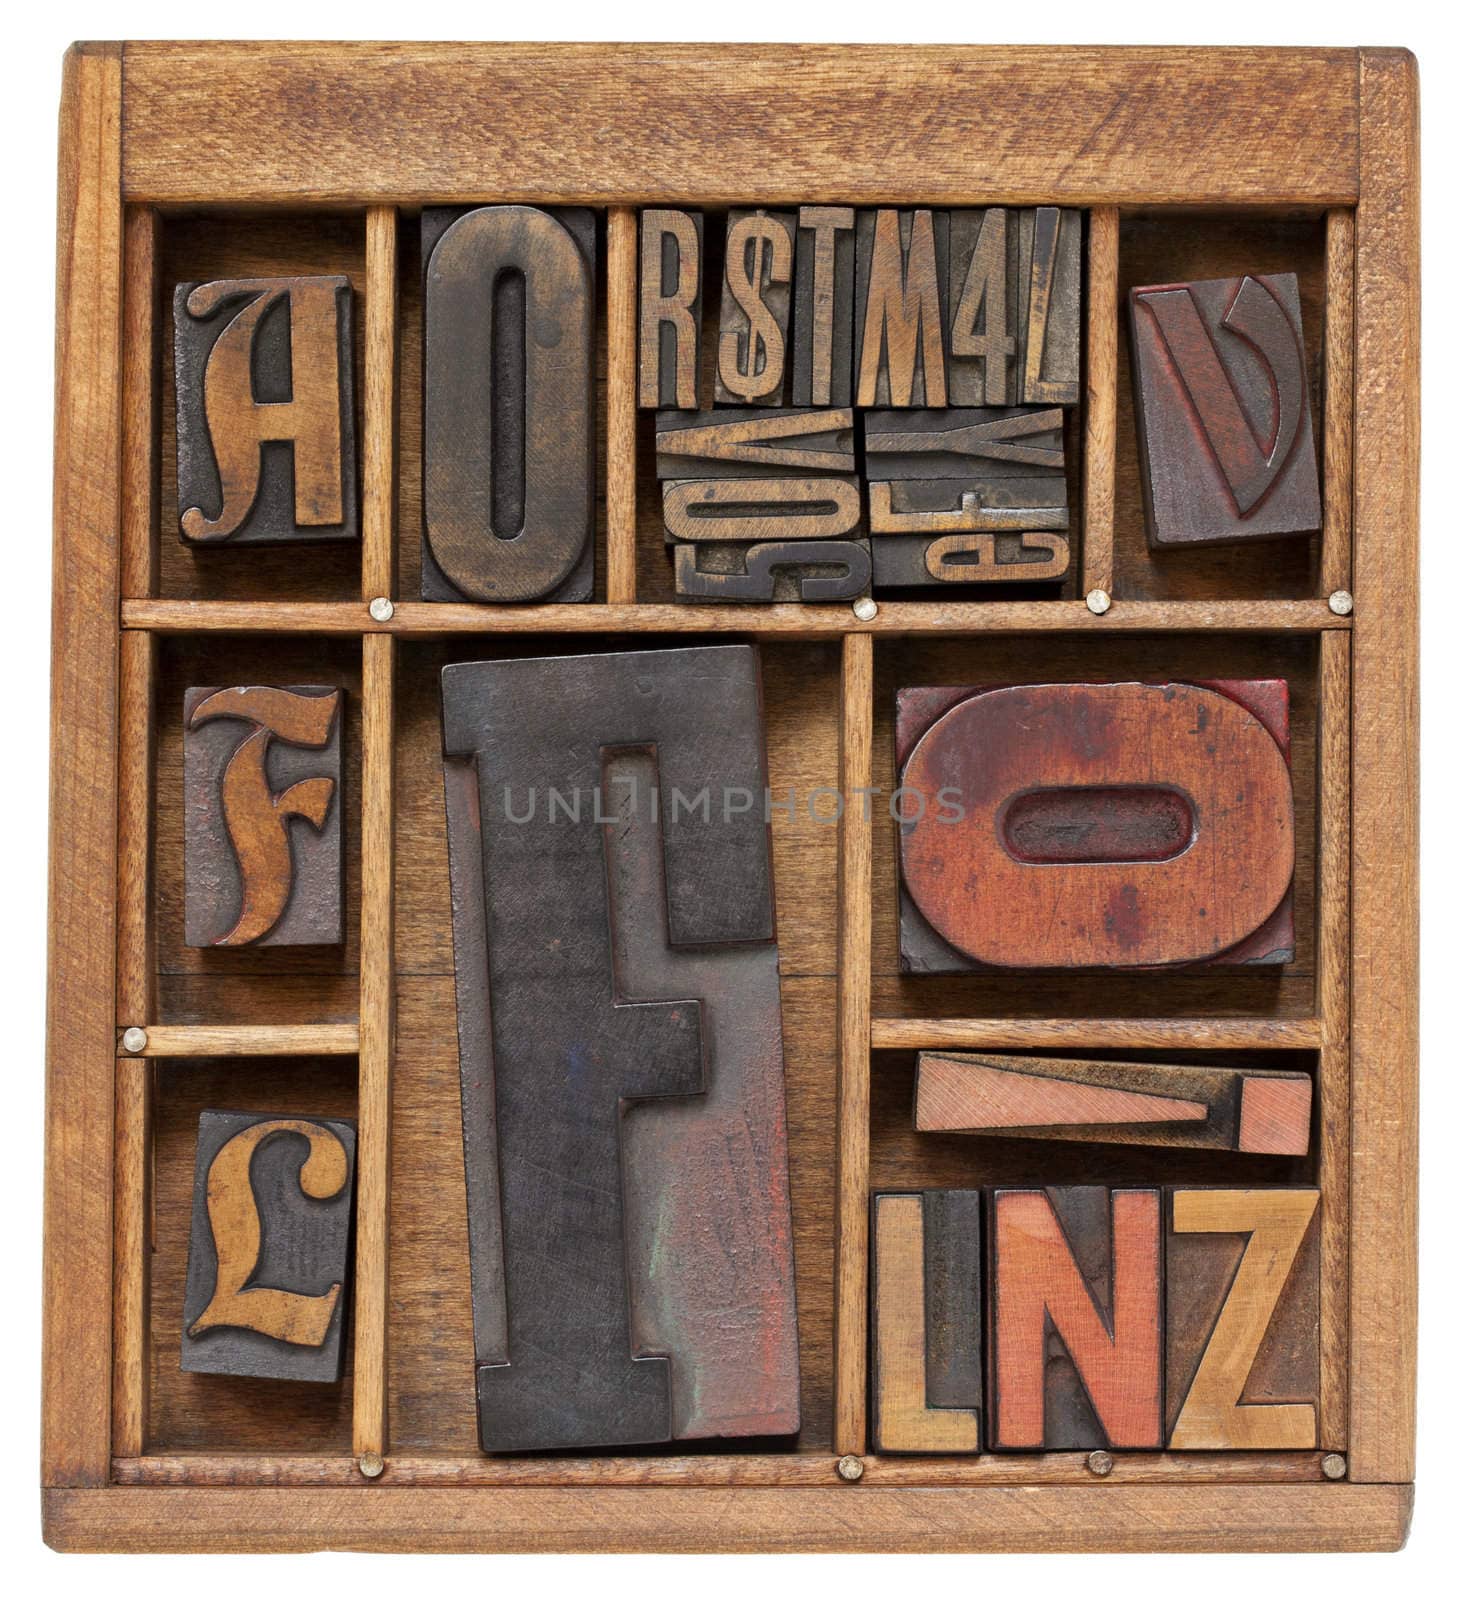 a variety of vintage letterpress printing blocks with big letter F in a small wooden typesetter box with dividers, isolated on white